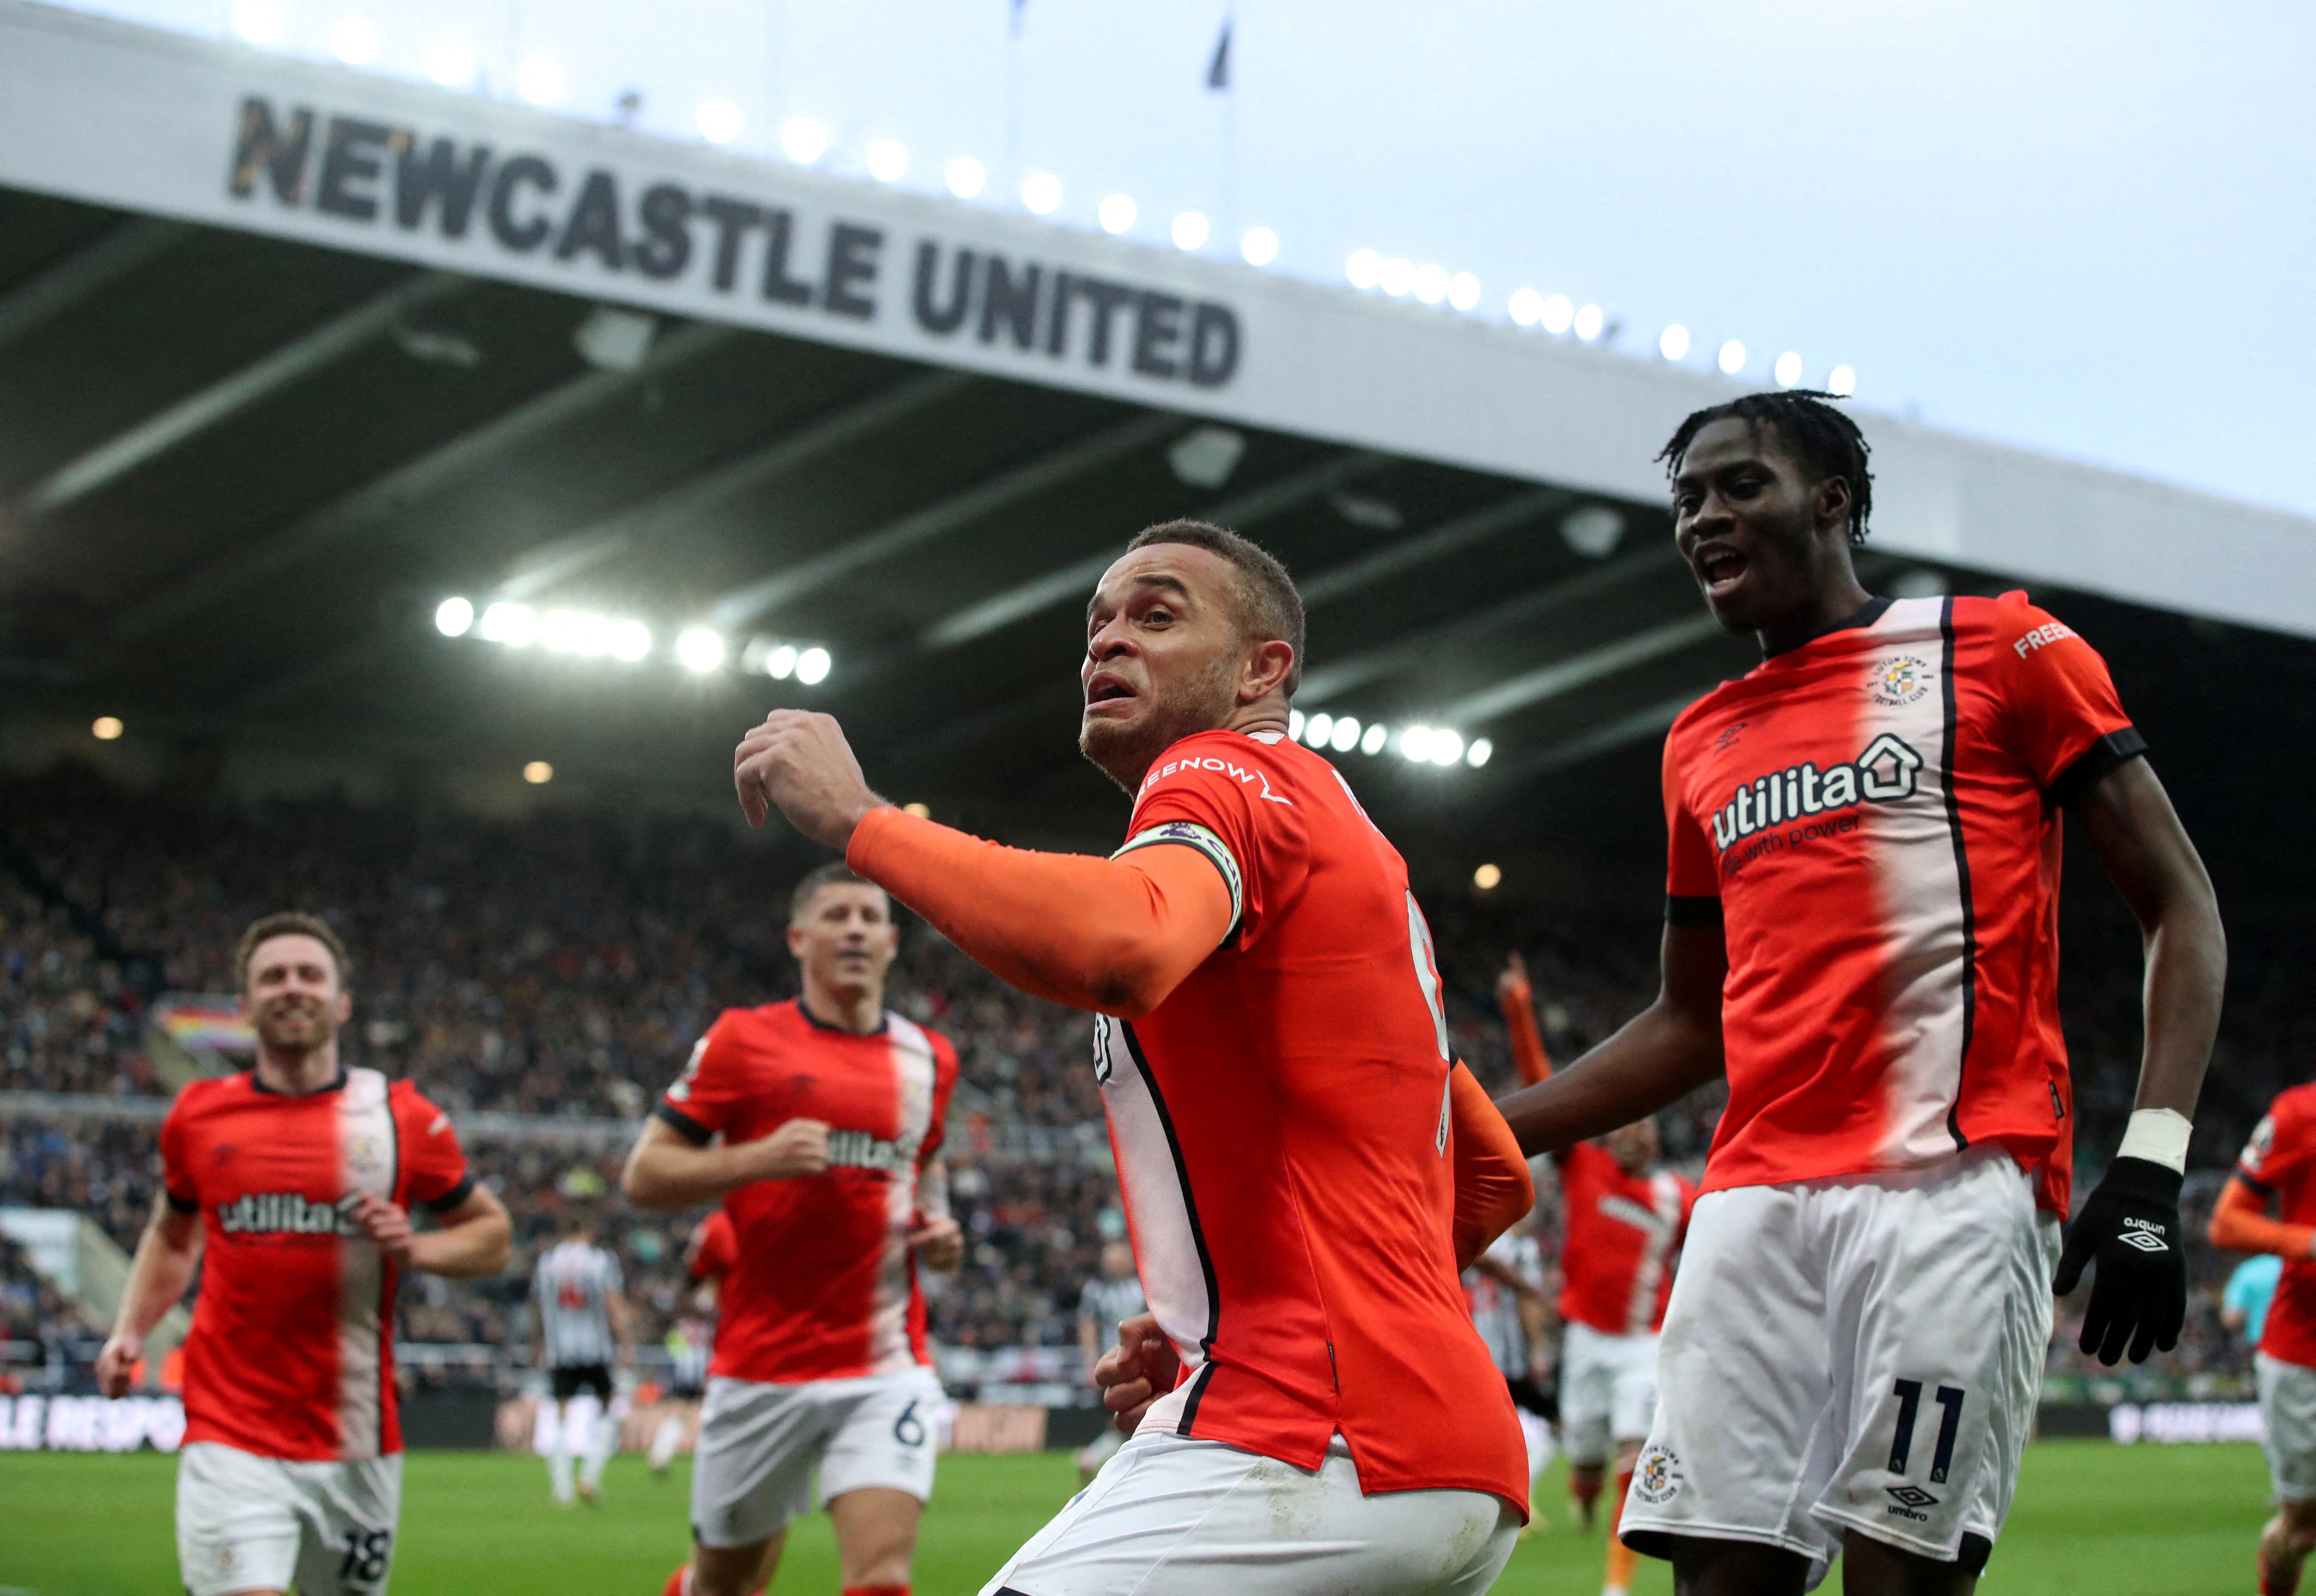 Newcastle come back from two down in epic 4-4 draw with Luton | Reuters